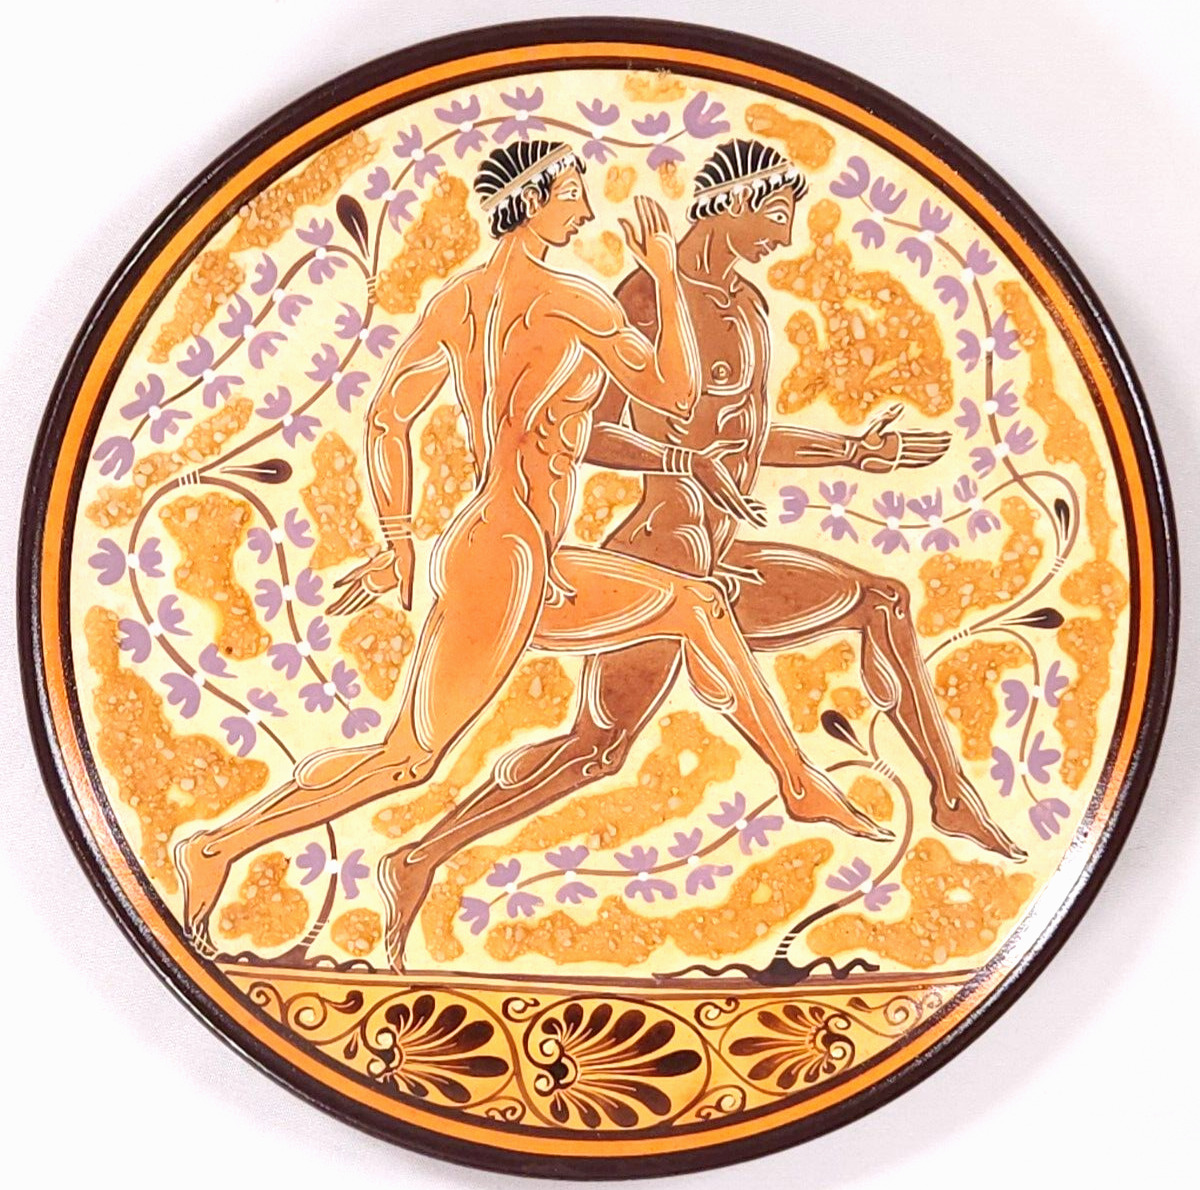 Hand Made In Greece Greek Vintage Souvenir Wall Hanging Plate Signed Olympic Men